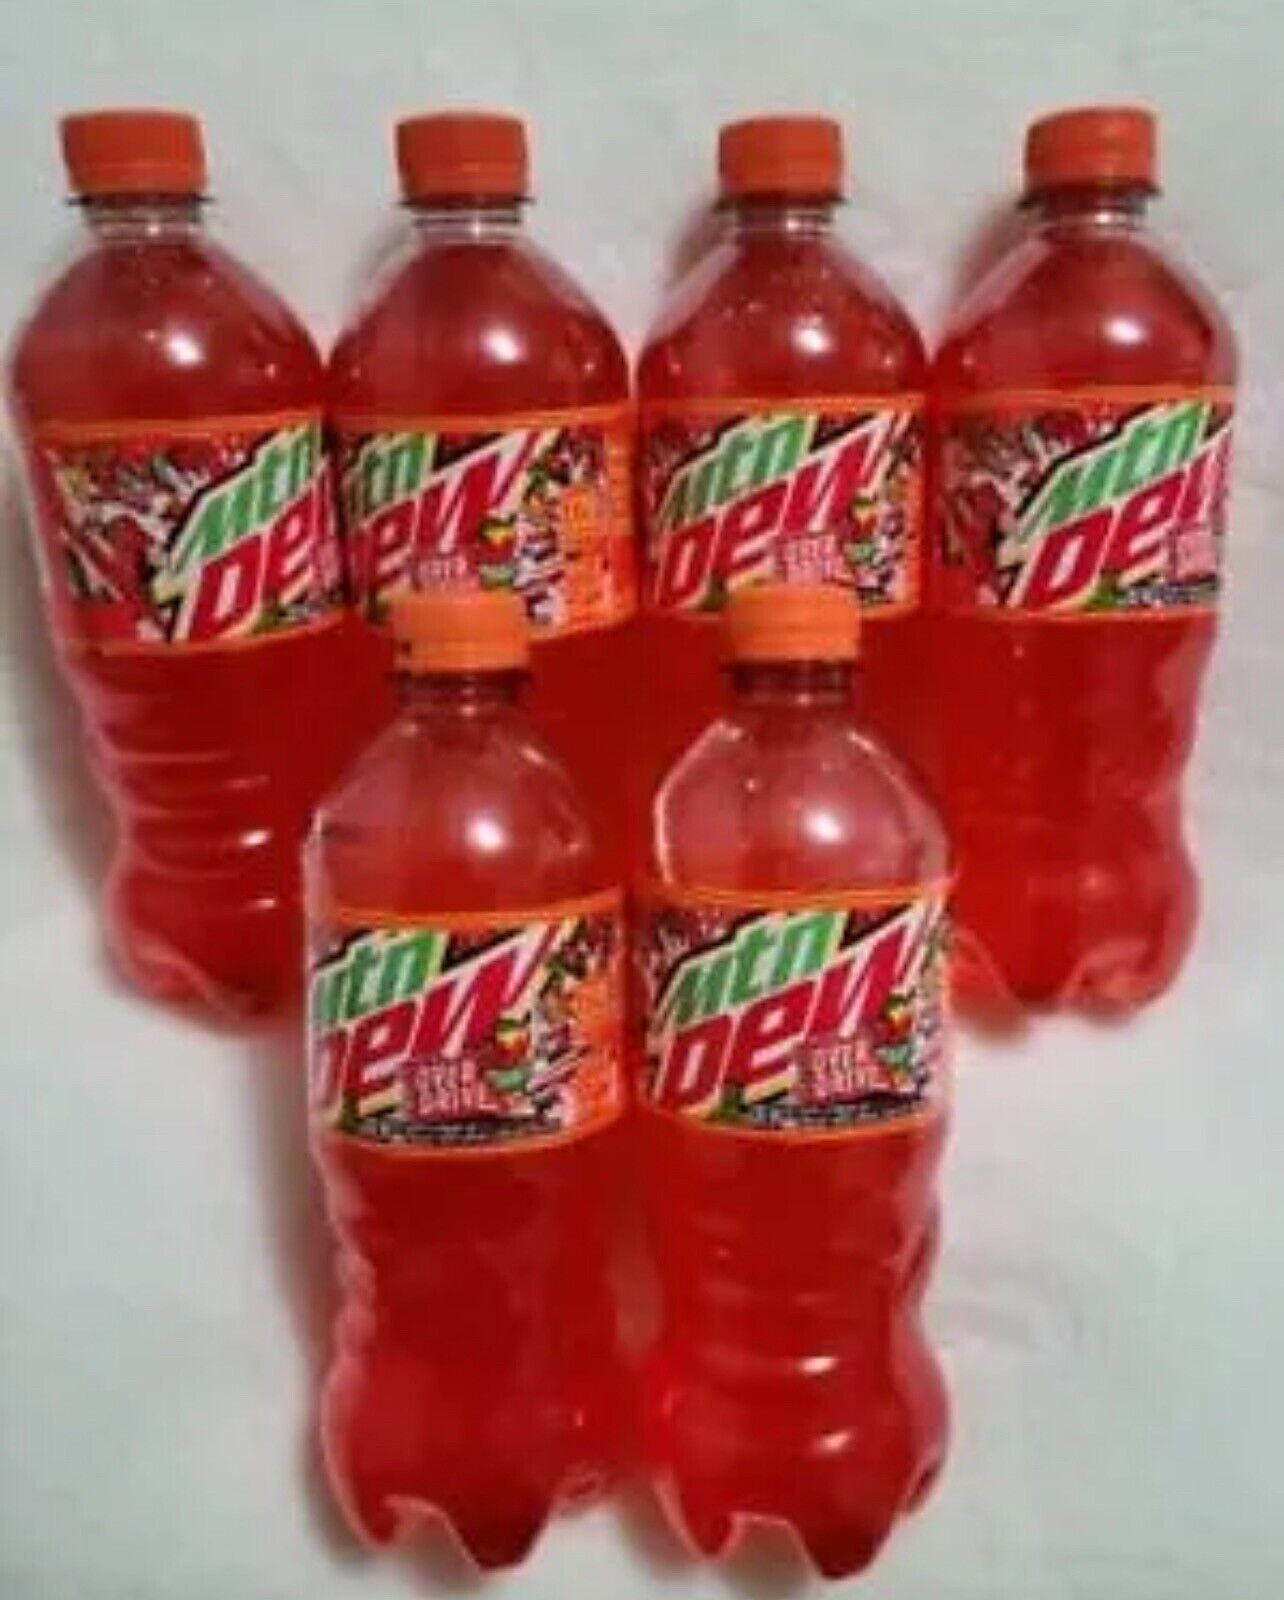 OVERDRIVE MOUNTAIN DEW BRAND NEW LIMITED 20OZ BOTTLES 6 COUNT RARE CASEYS